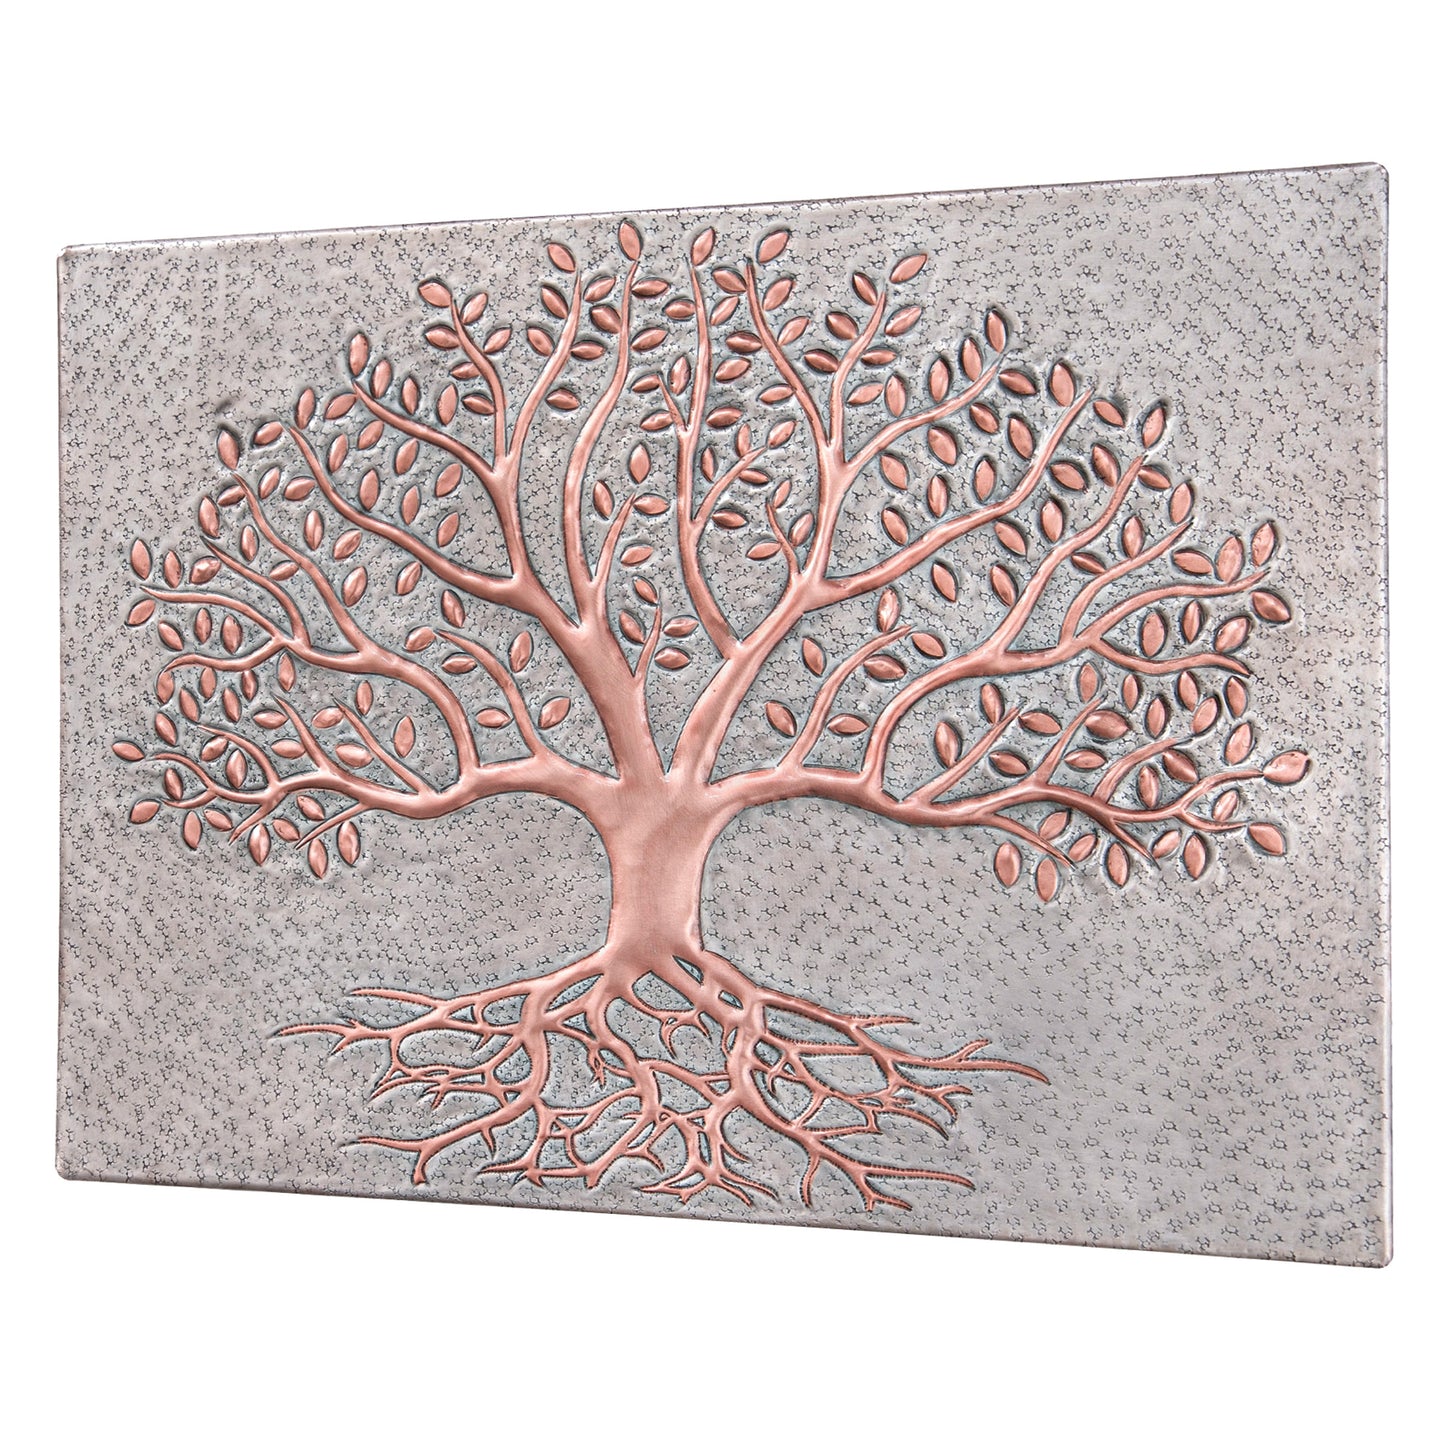 Tree with Roots Kitchen Backsplash Tile - 12"x16" Gray&Copper